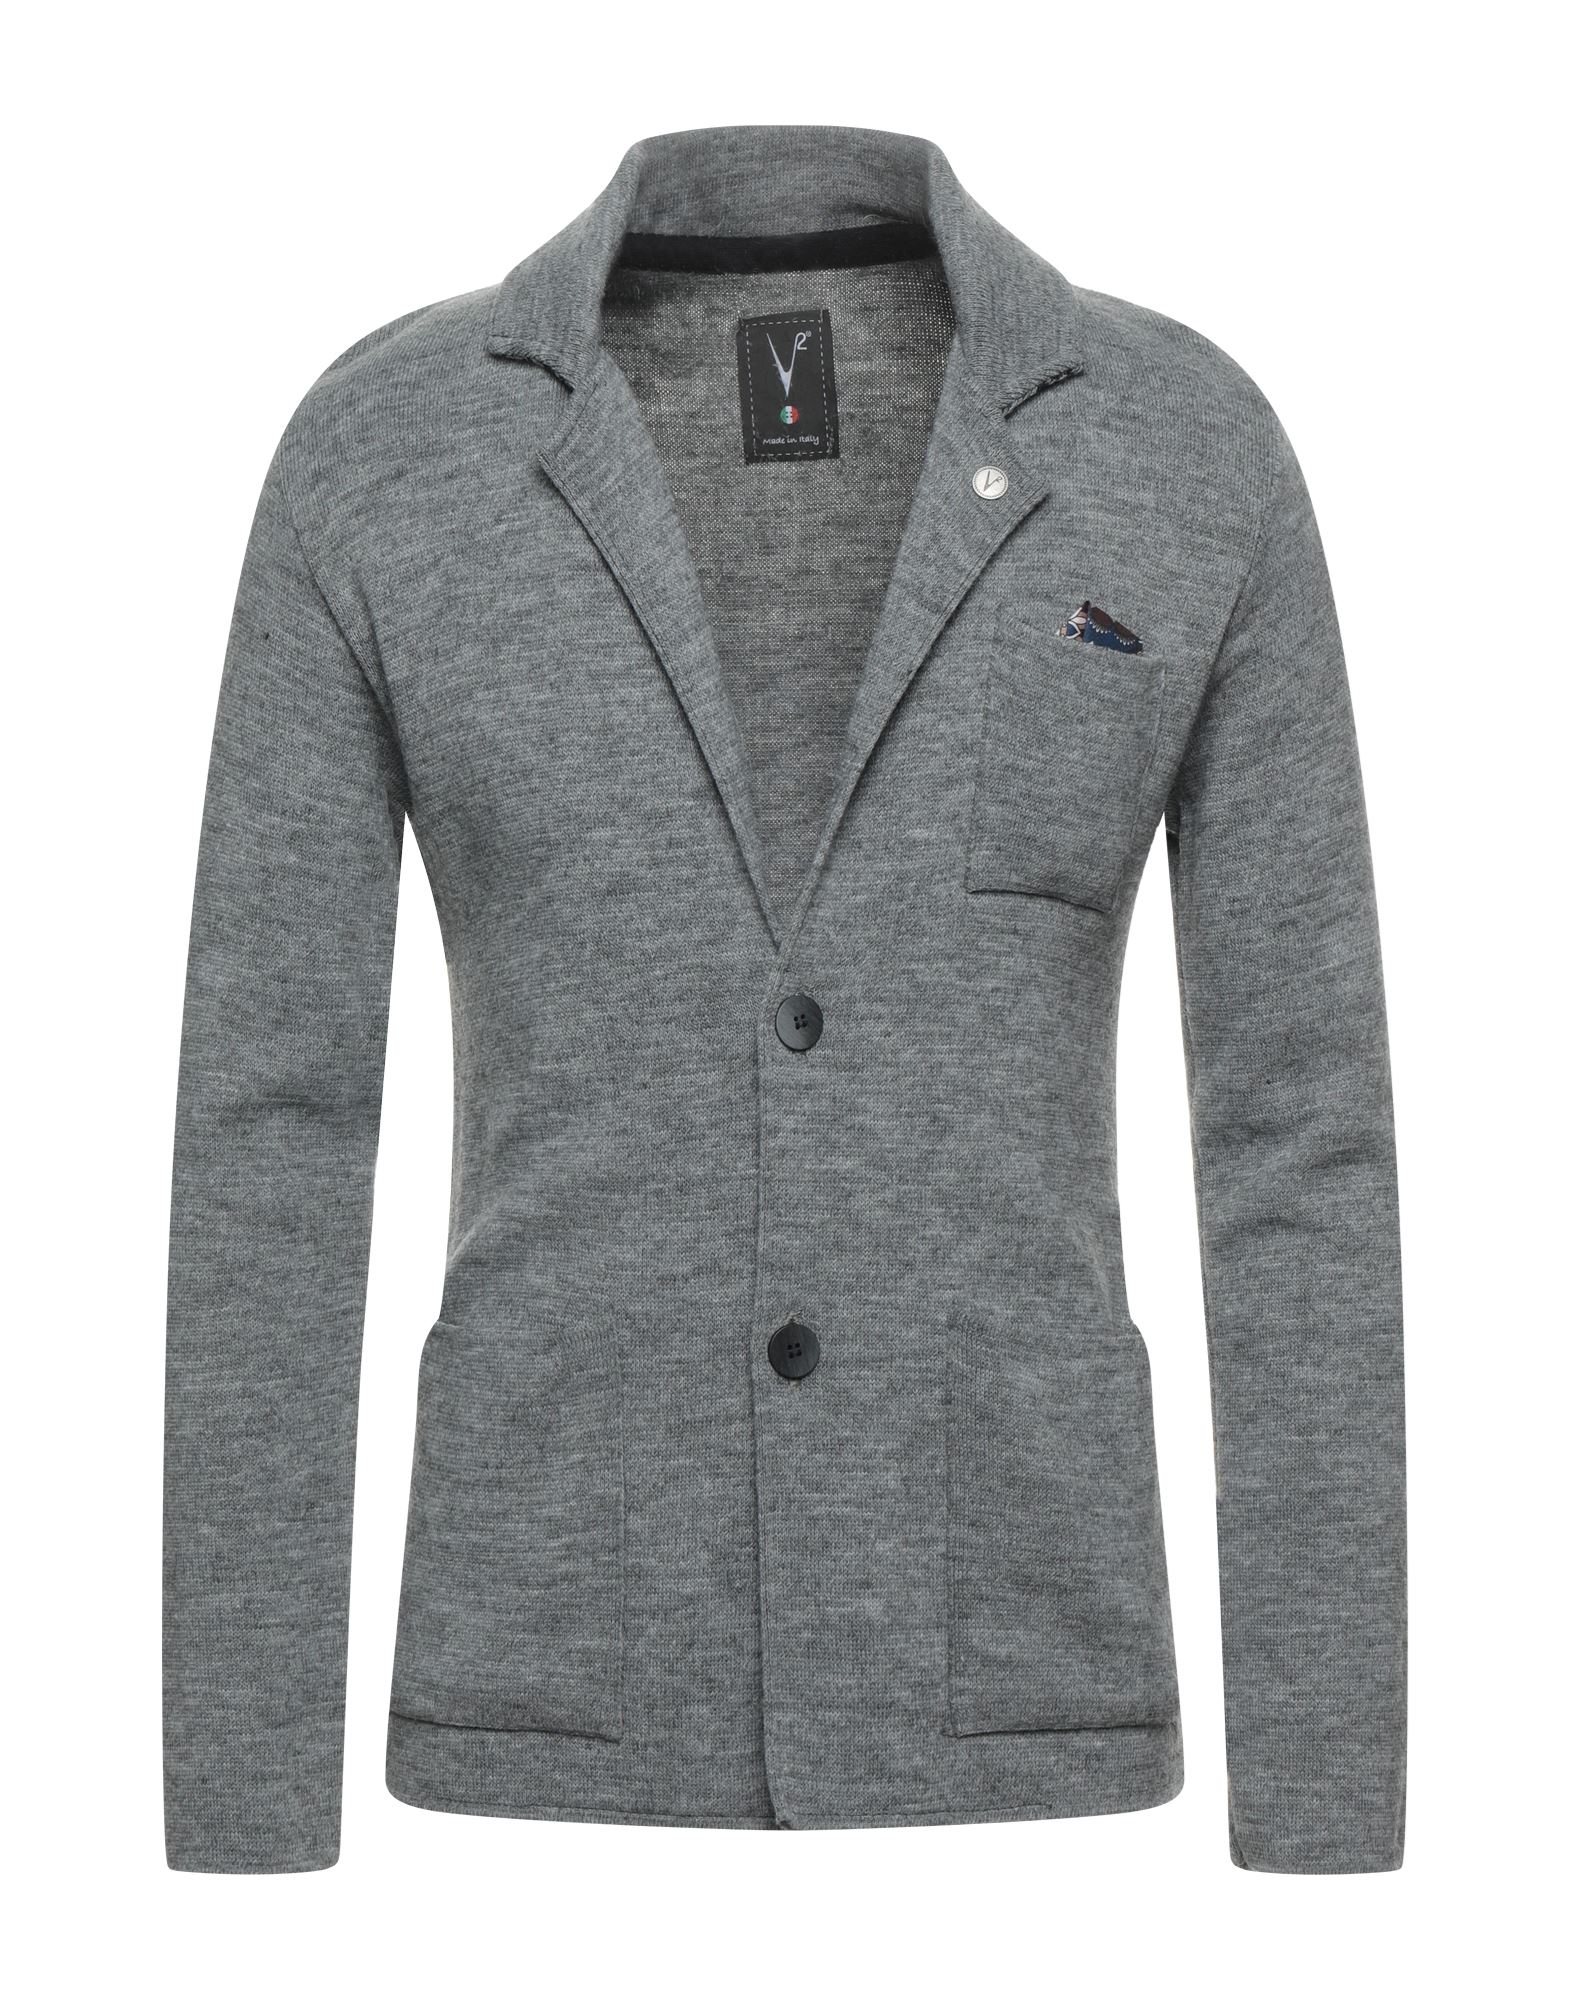 V2® Brand Suit Jackets In Gray